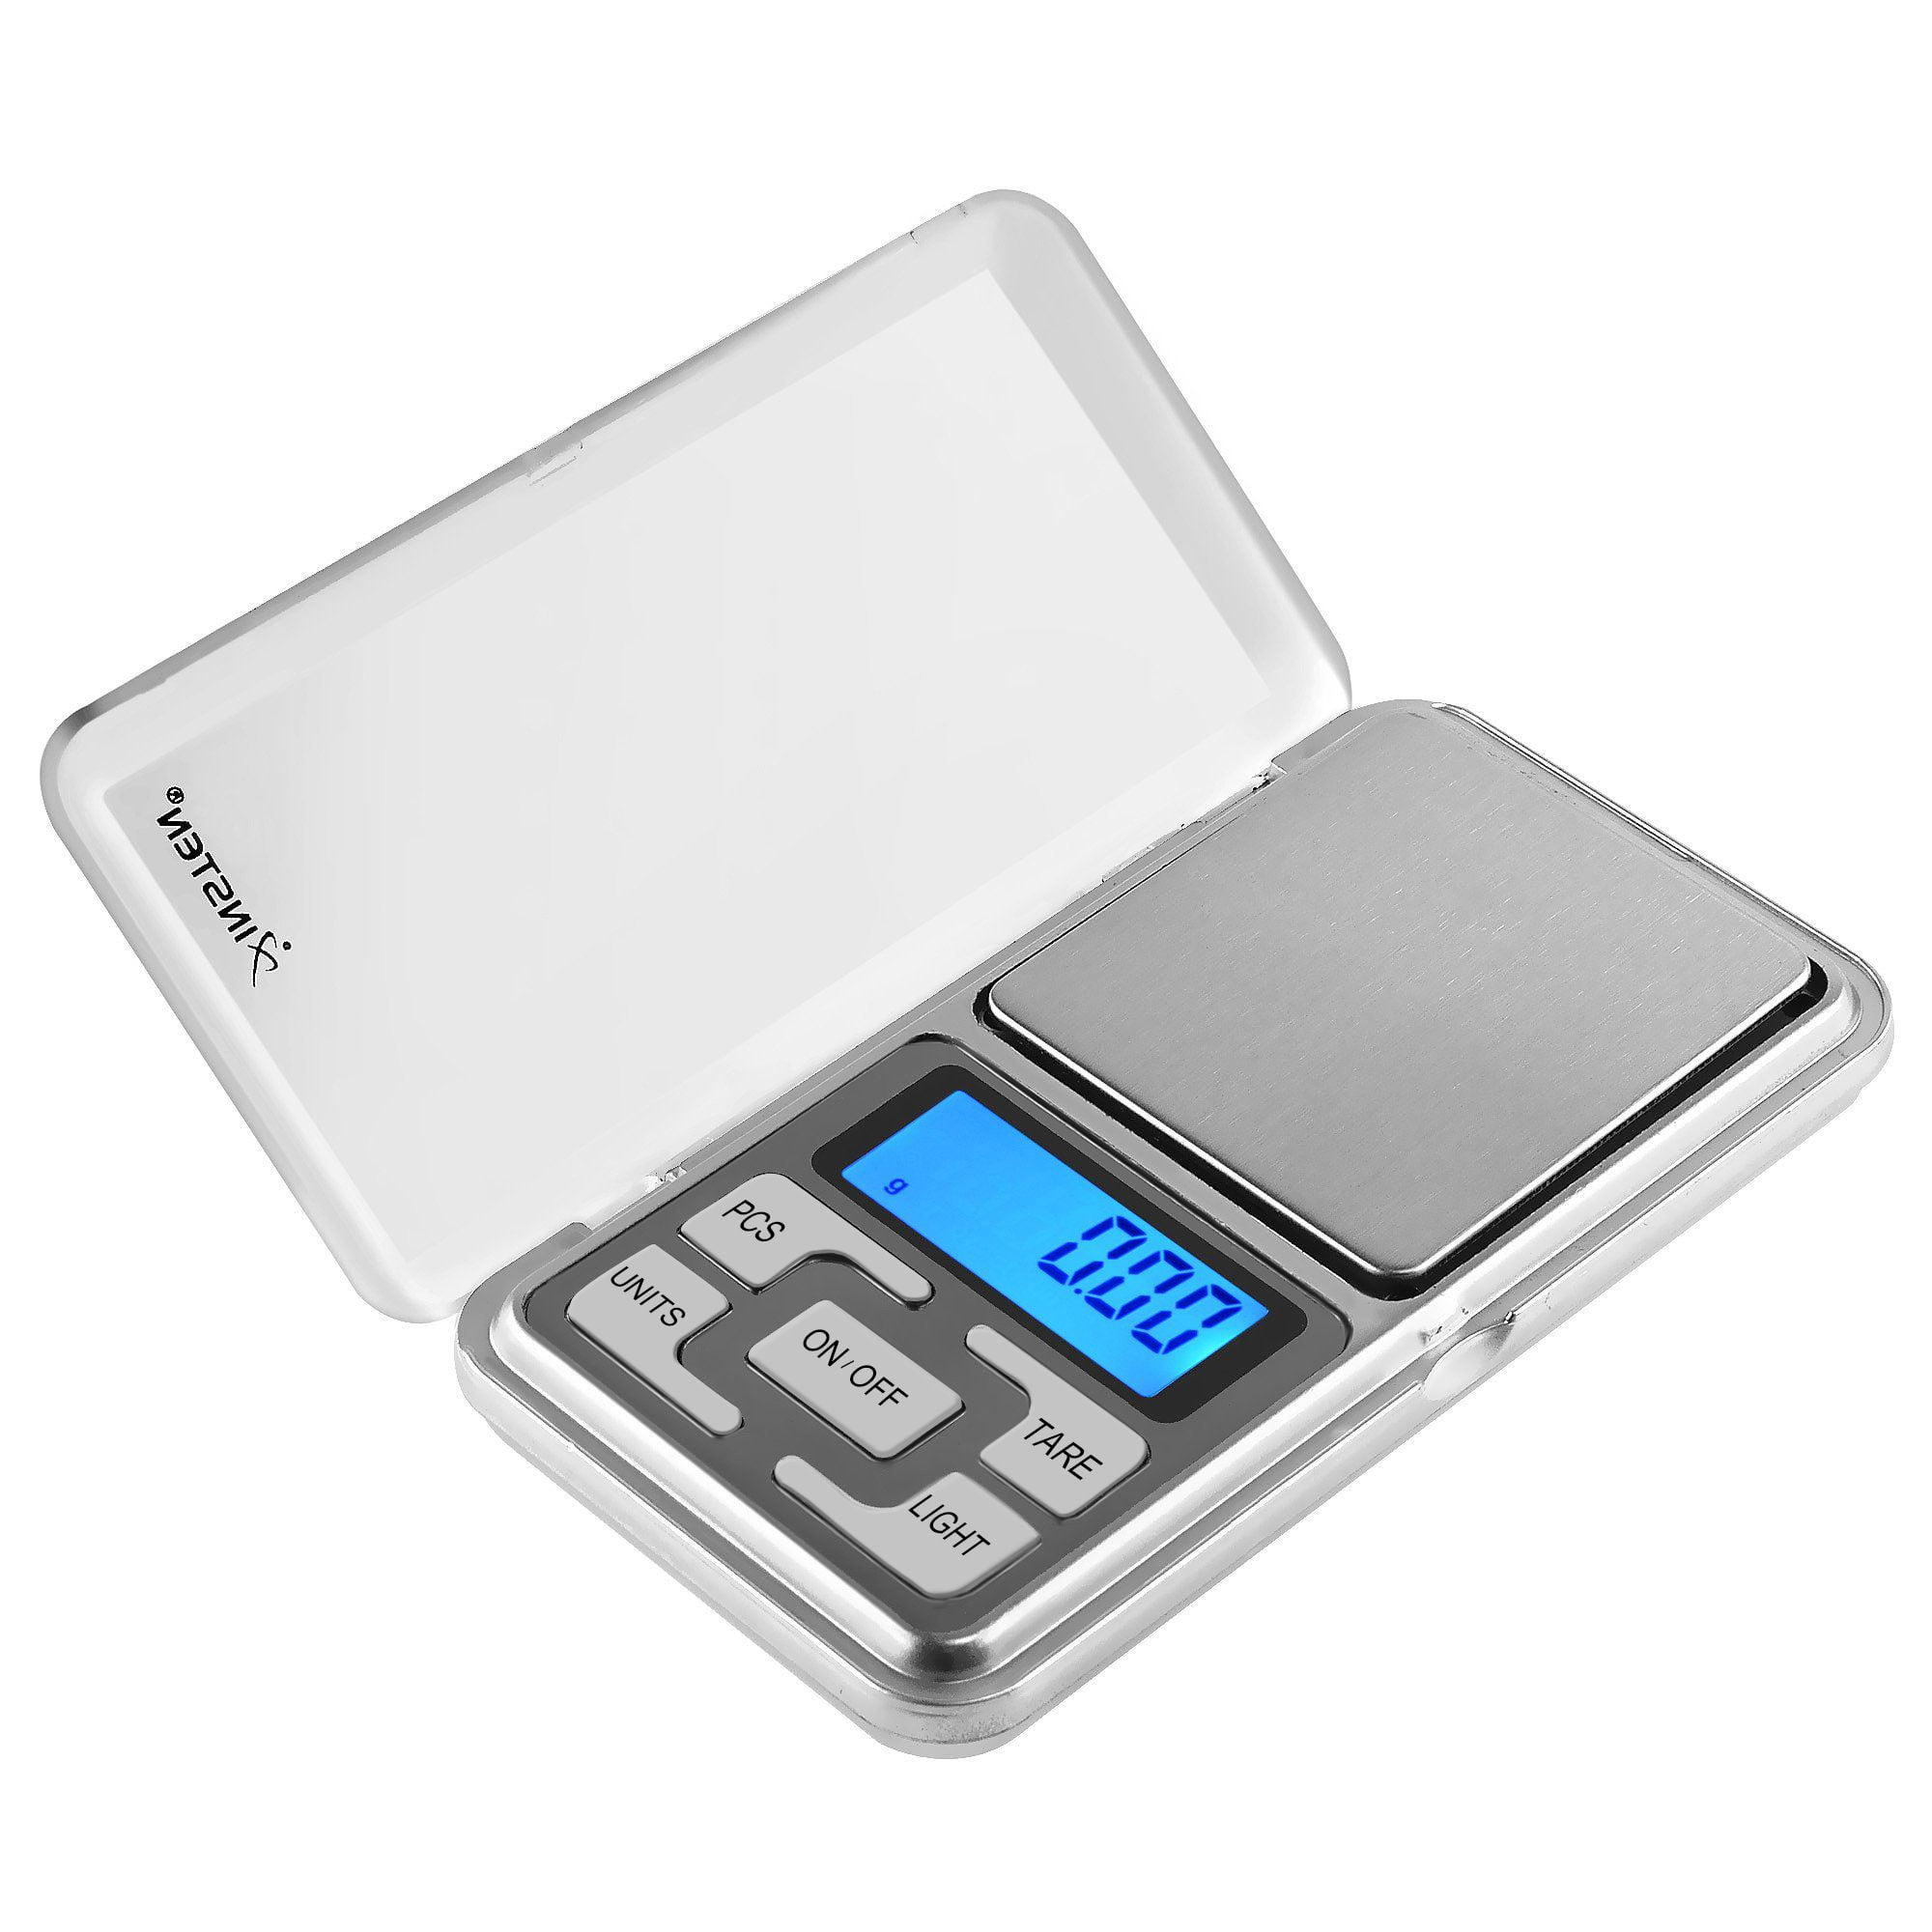 LCD Portable Palm Jewelry Pocket Scale Digital Electric Weight Diamond Coin #8Y 